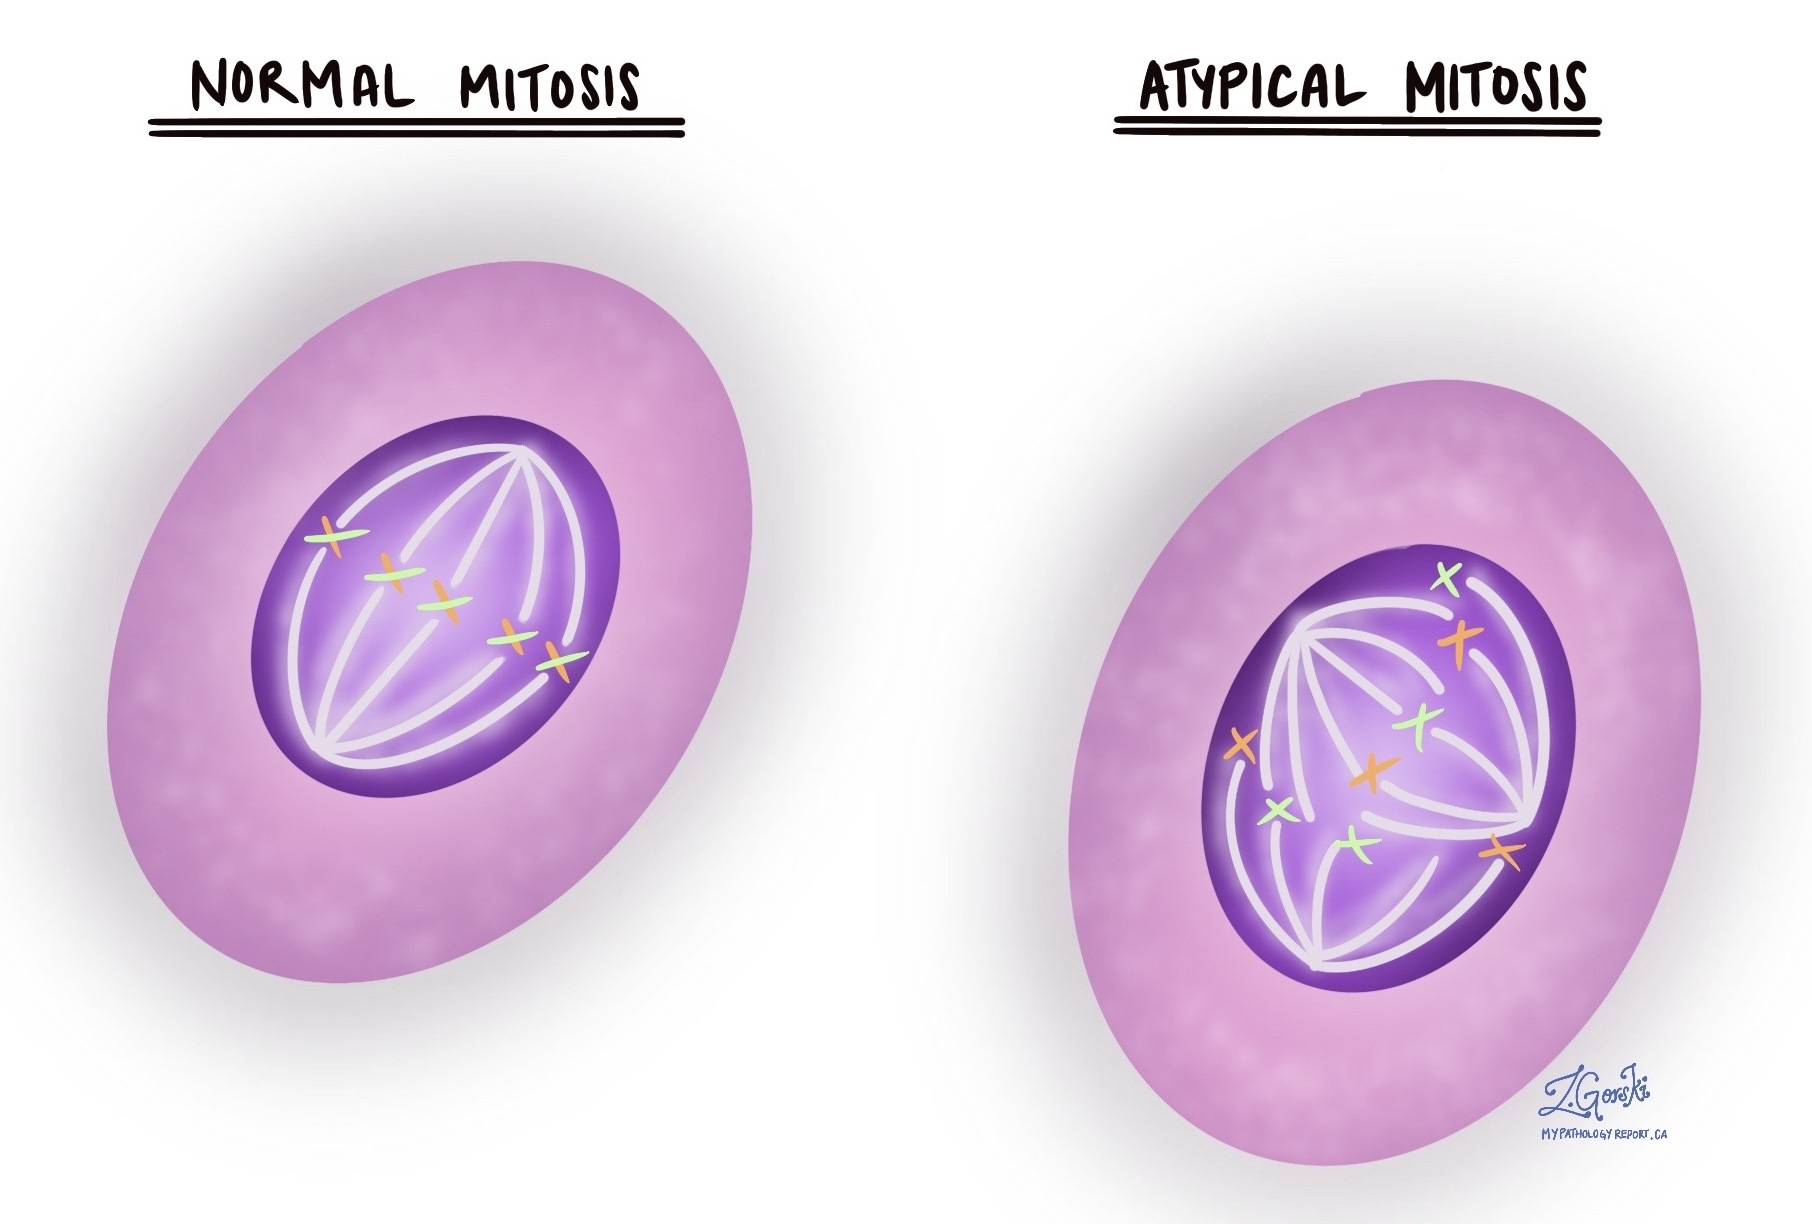 atypical mitosis